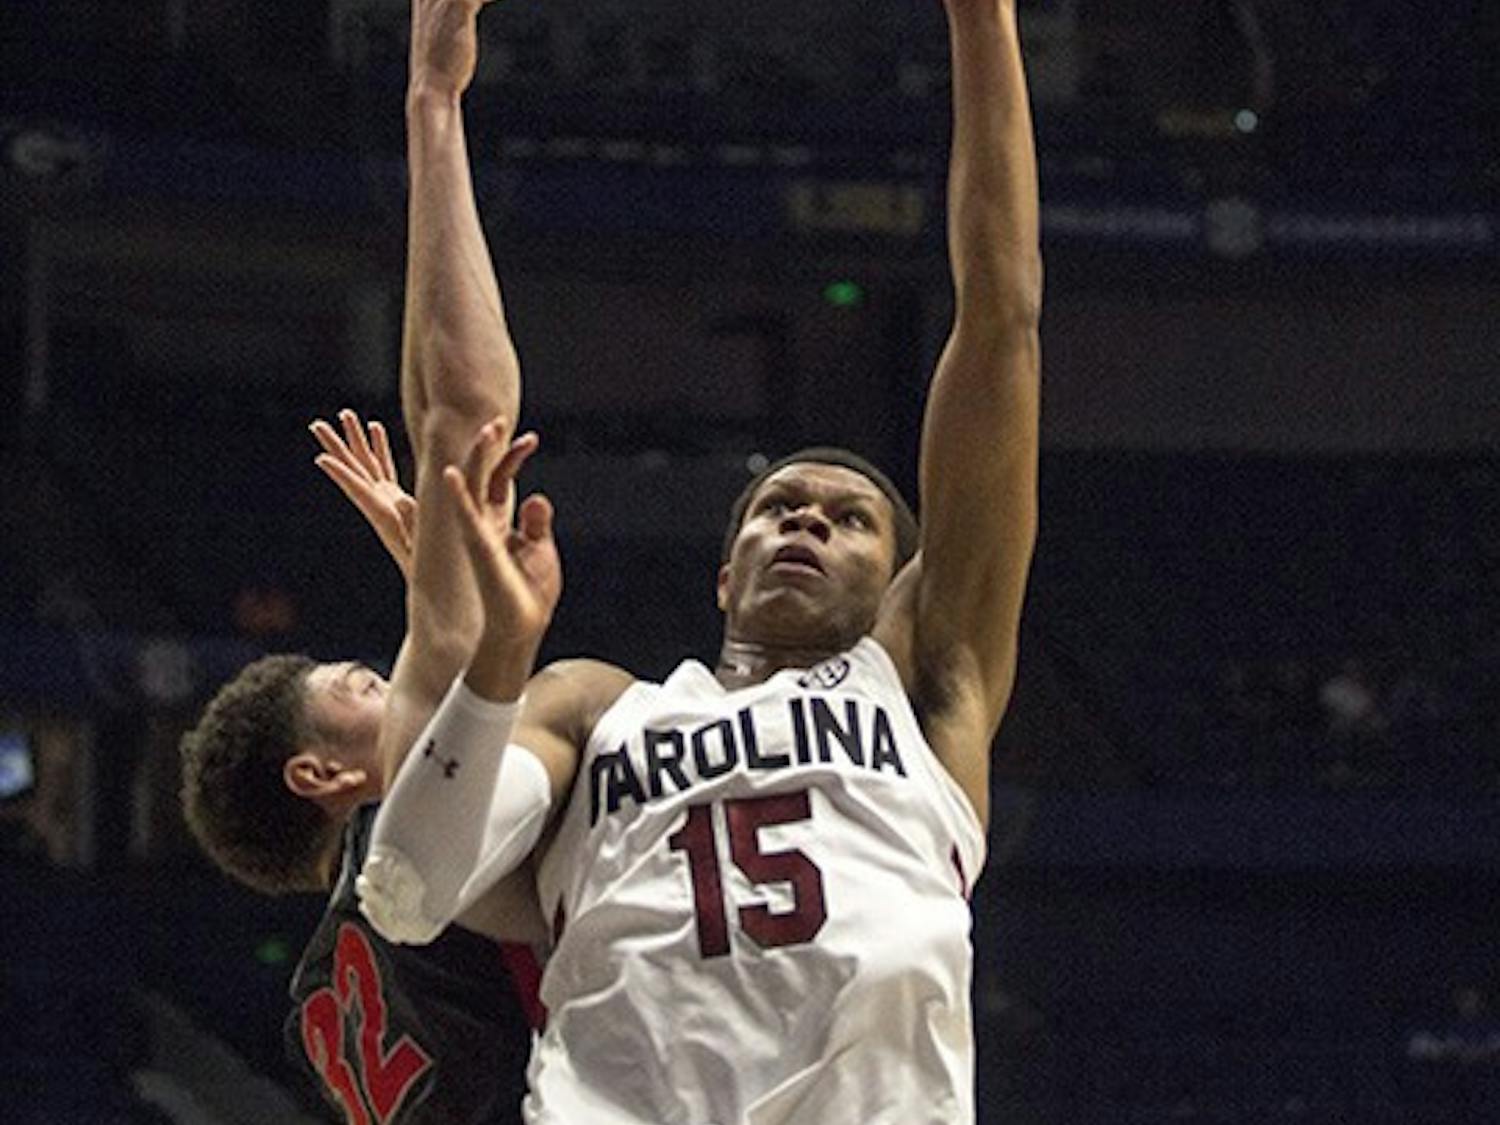 Men's basketball faced Georgia Bulldogs in the first round of the SEC Tournament. The final score was Georgia 65, Gamecocks 64. 